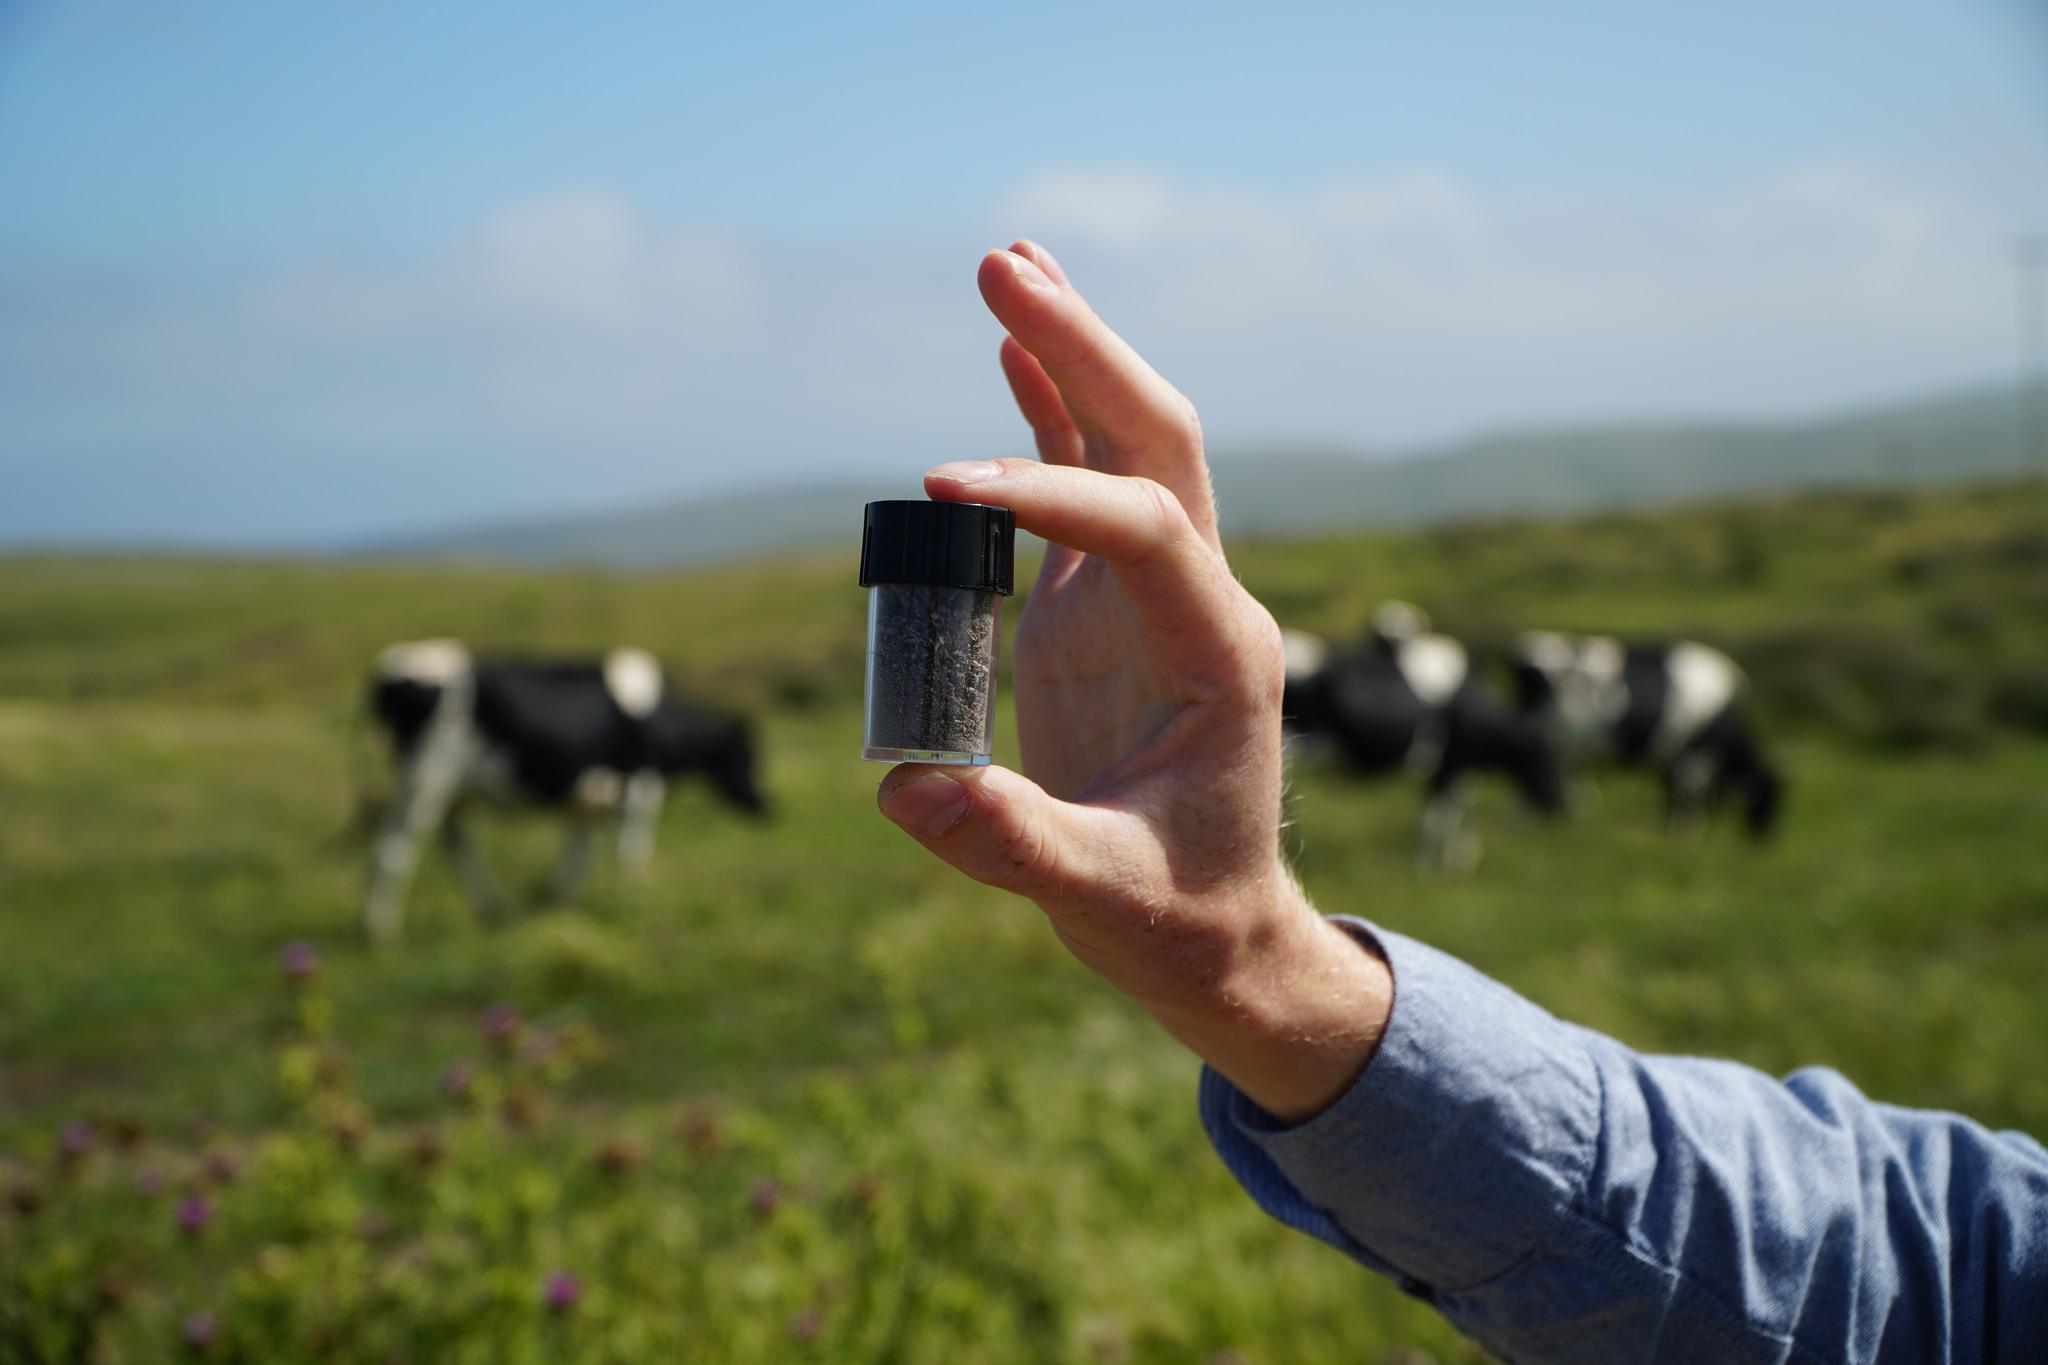 A hand holding a small glass jar, against a backdrop of cows on a green field. Volta Greentech is one of the Swedish companies driving the green transition.